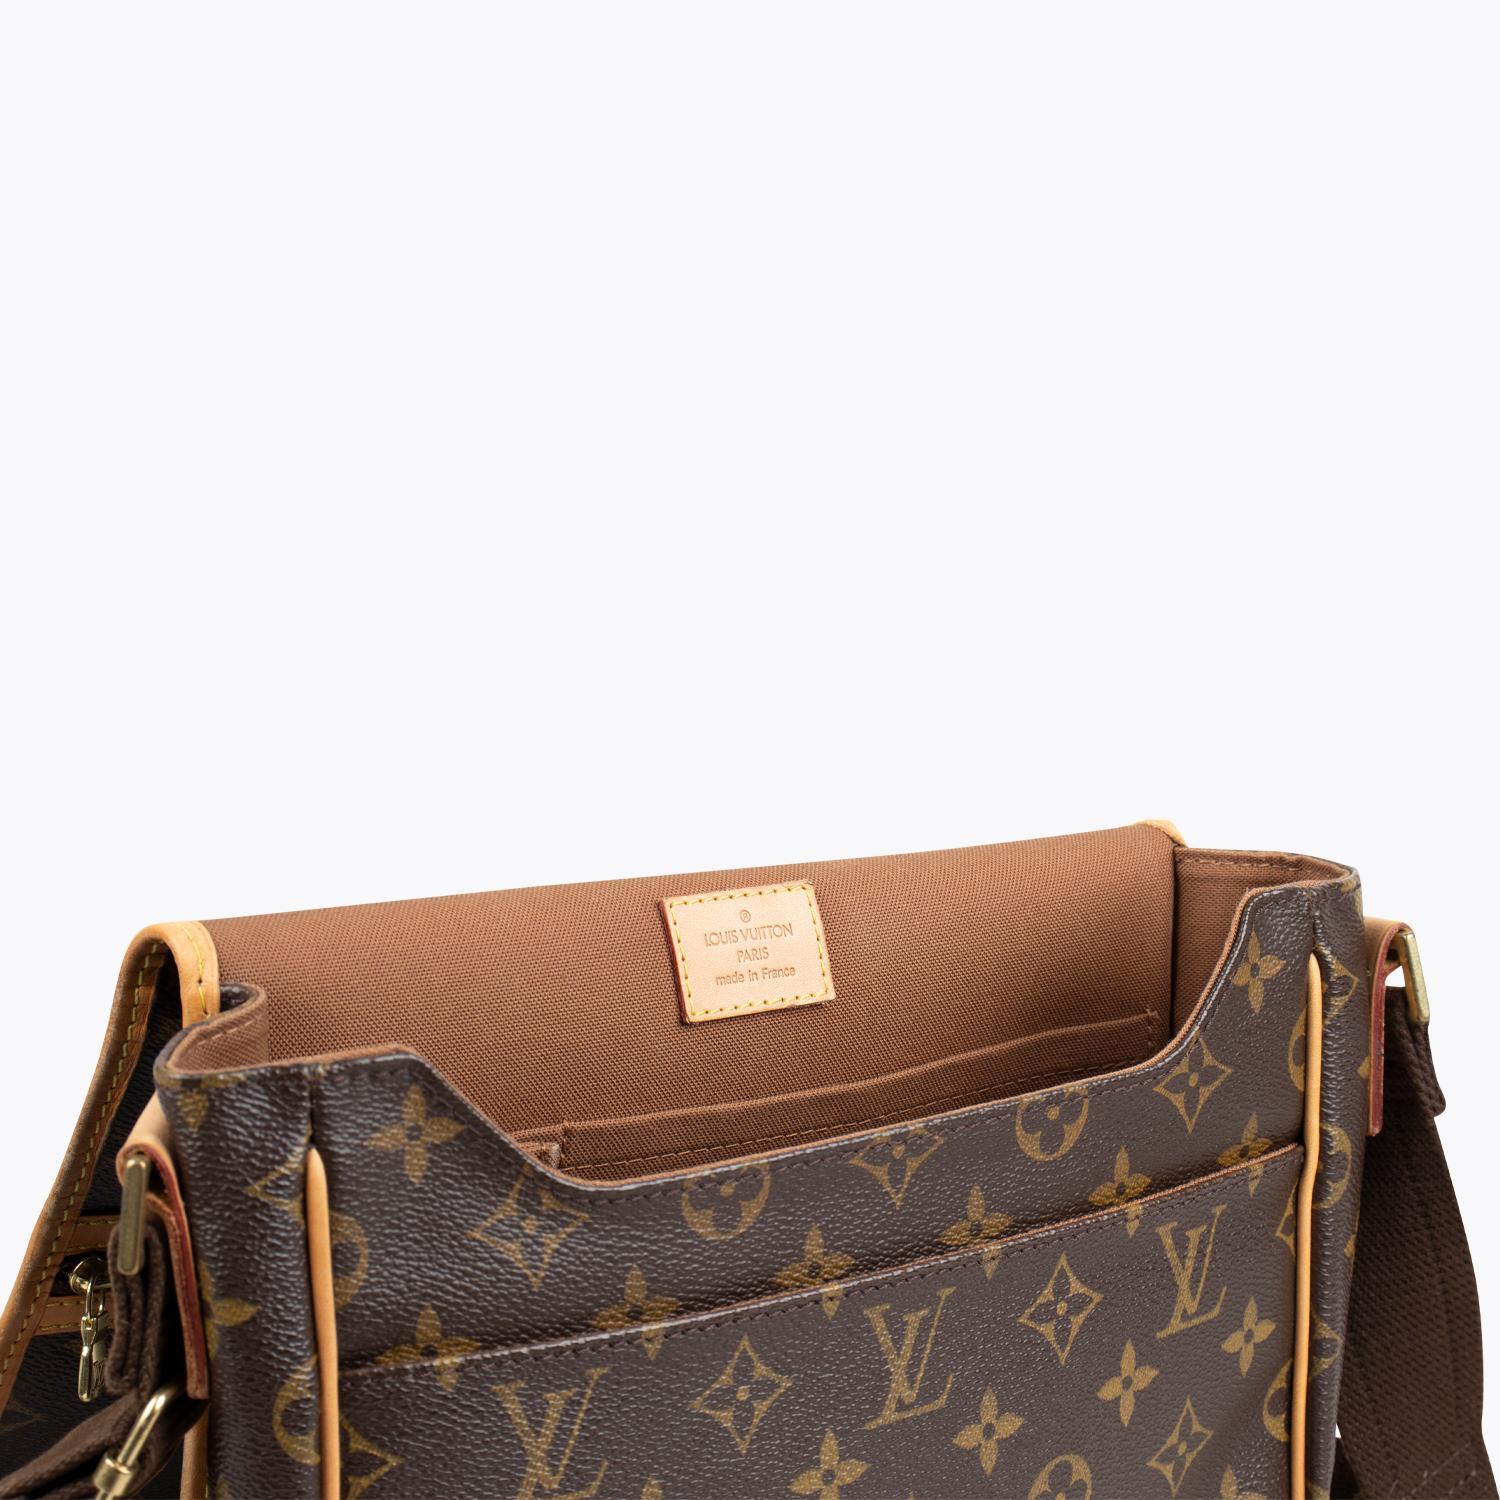 Louis Vuitton Bosphore Messenger PM In Good Condition For Sale In Sundbyberg, SE